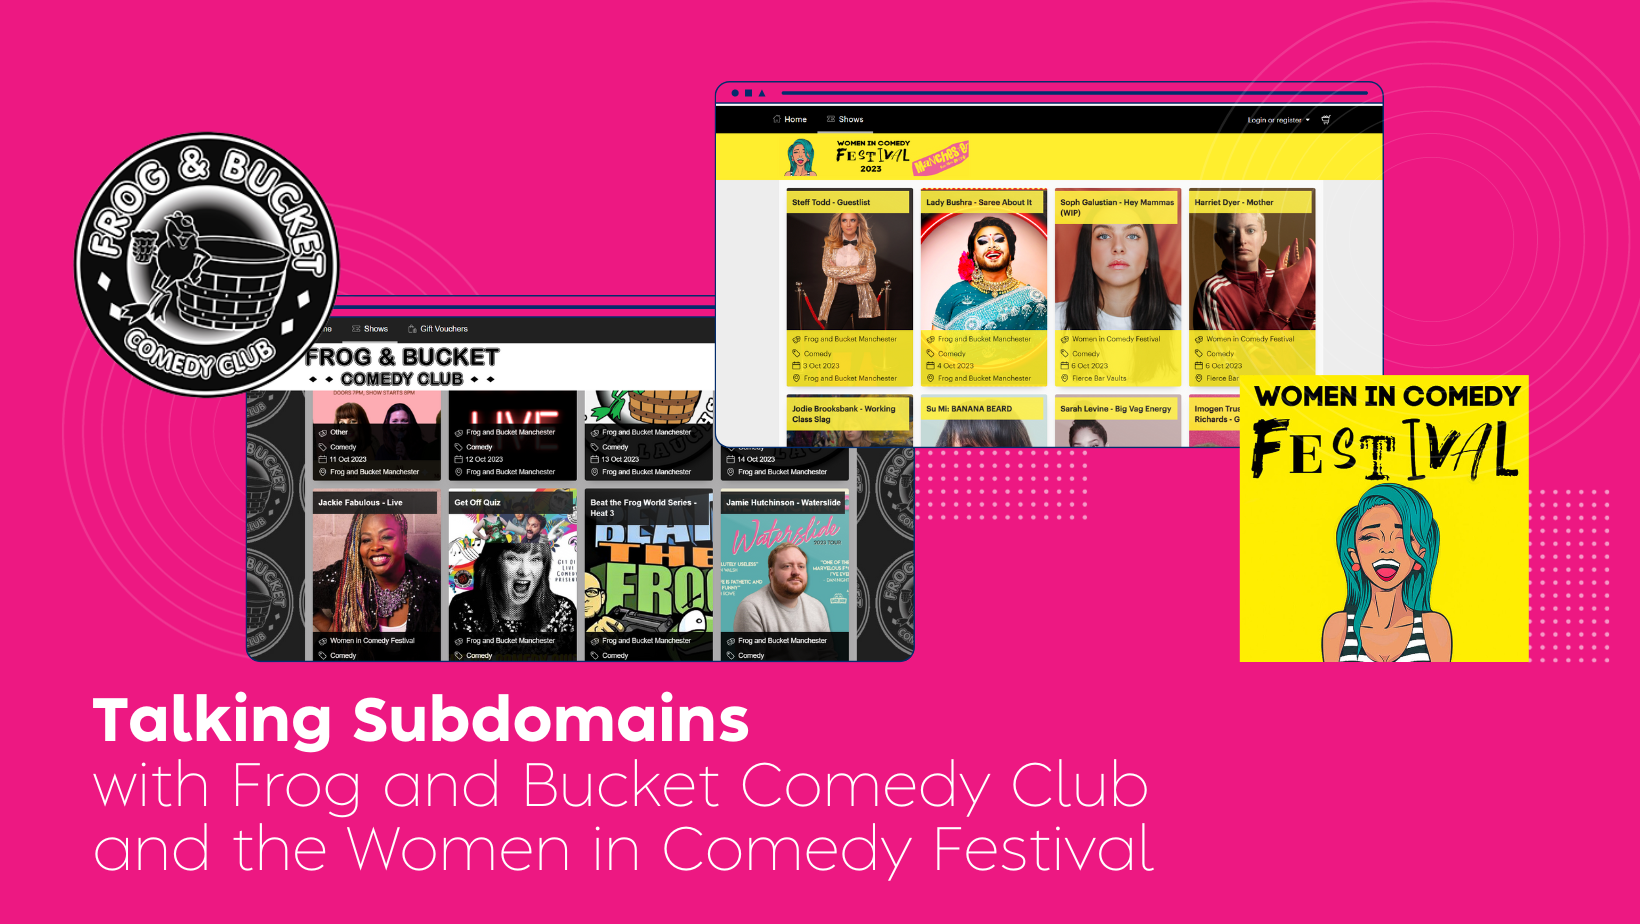 Talking Subdomains with Frog and Bucket Comedy Club and Women in Comedy Festival